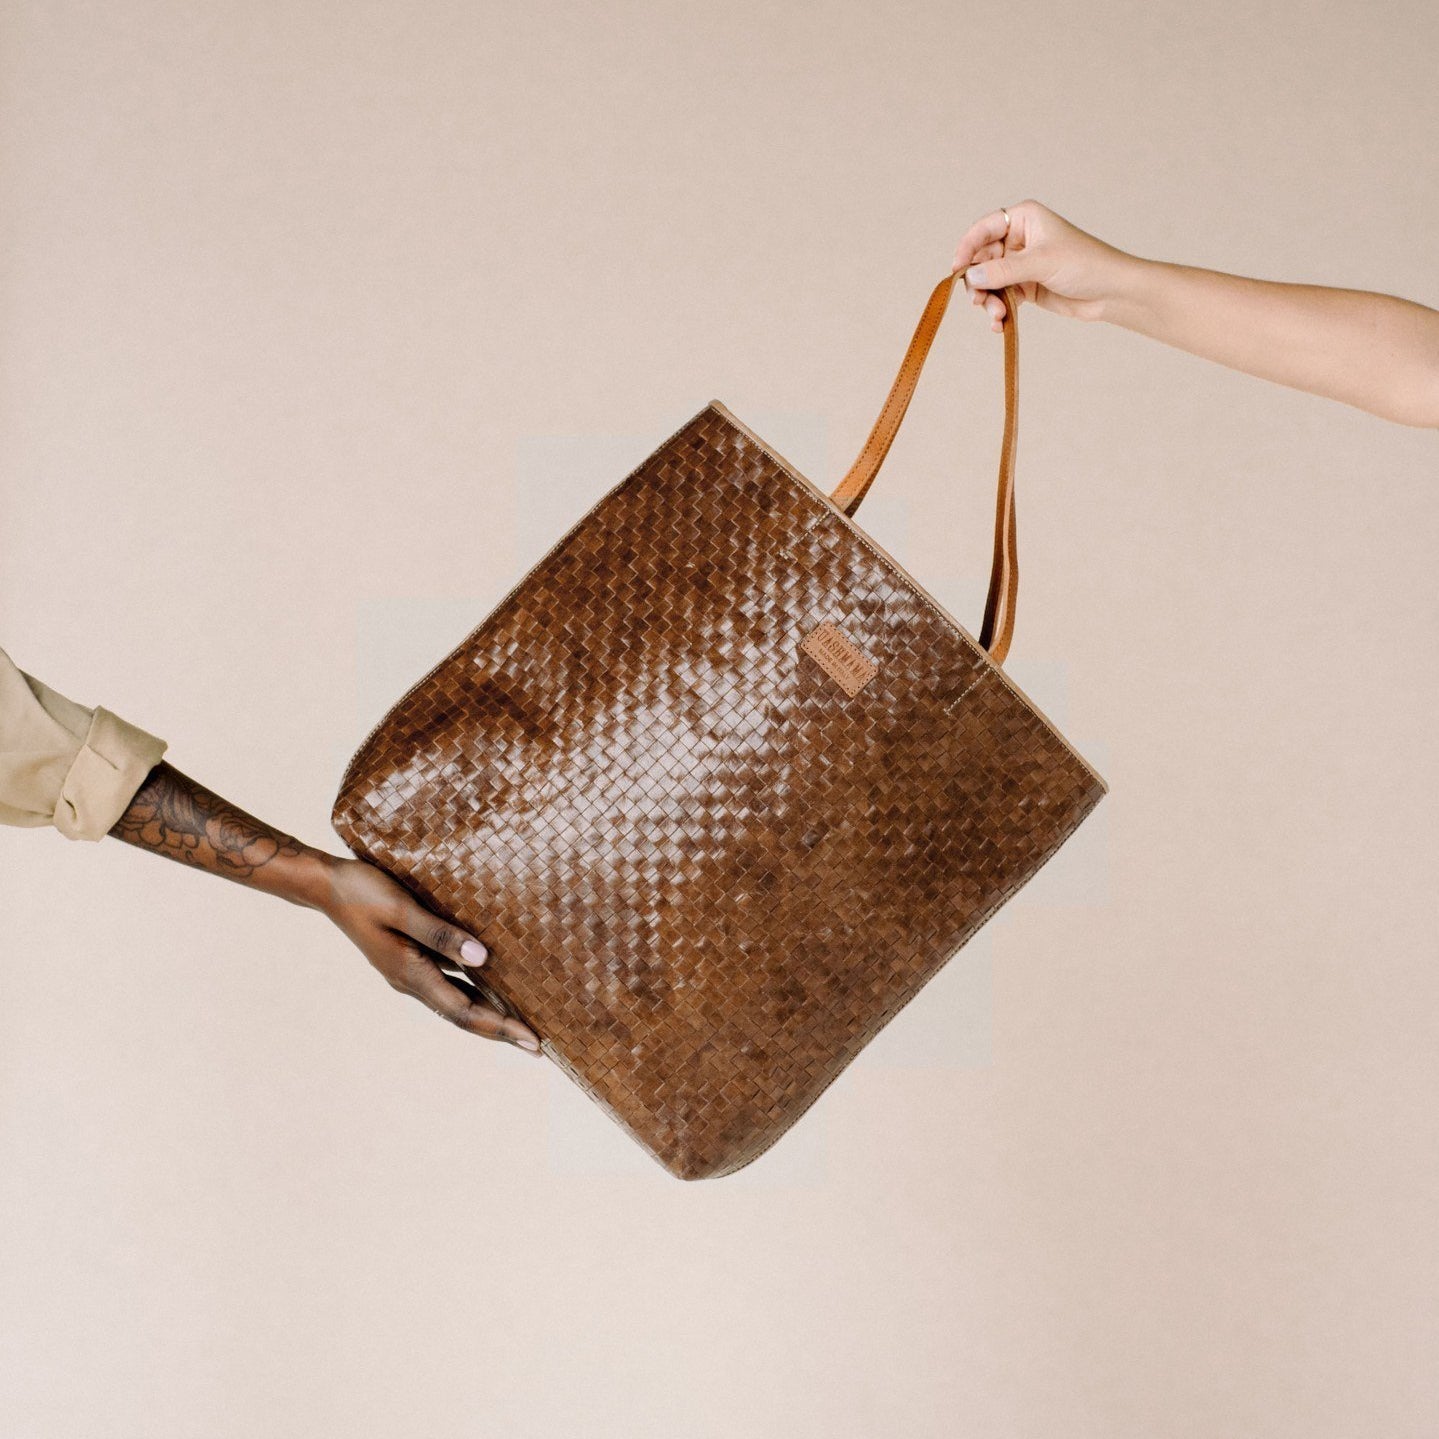 A dark tan woven washable paper tote bag with tan leather handles and a tan leather UASHMAMA logo label, is shown being passed from one woman's hand to another. One hand is flat along the base of the bag, and the other hand is shown holding the handles.